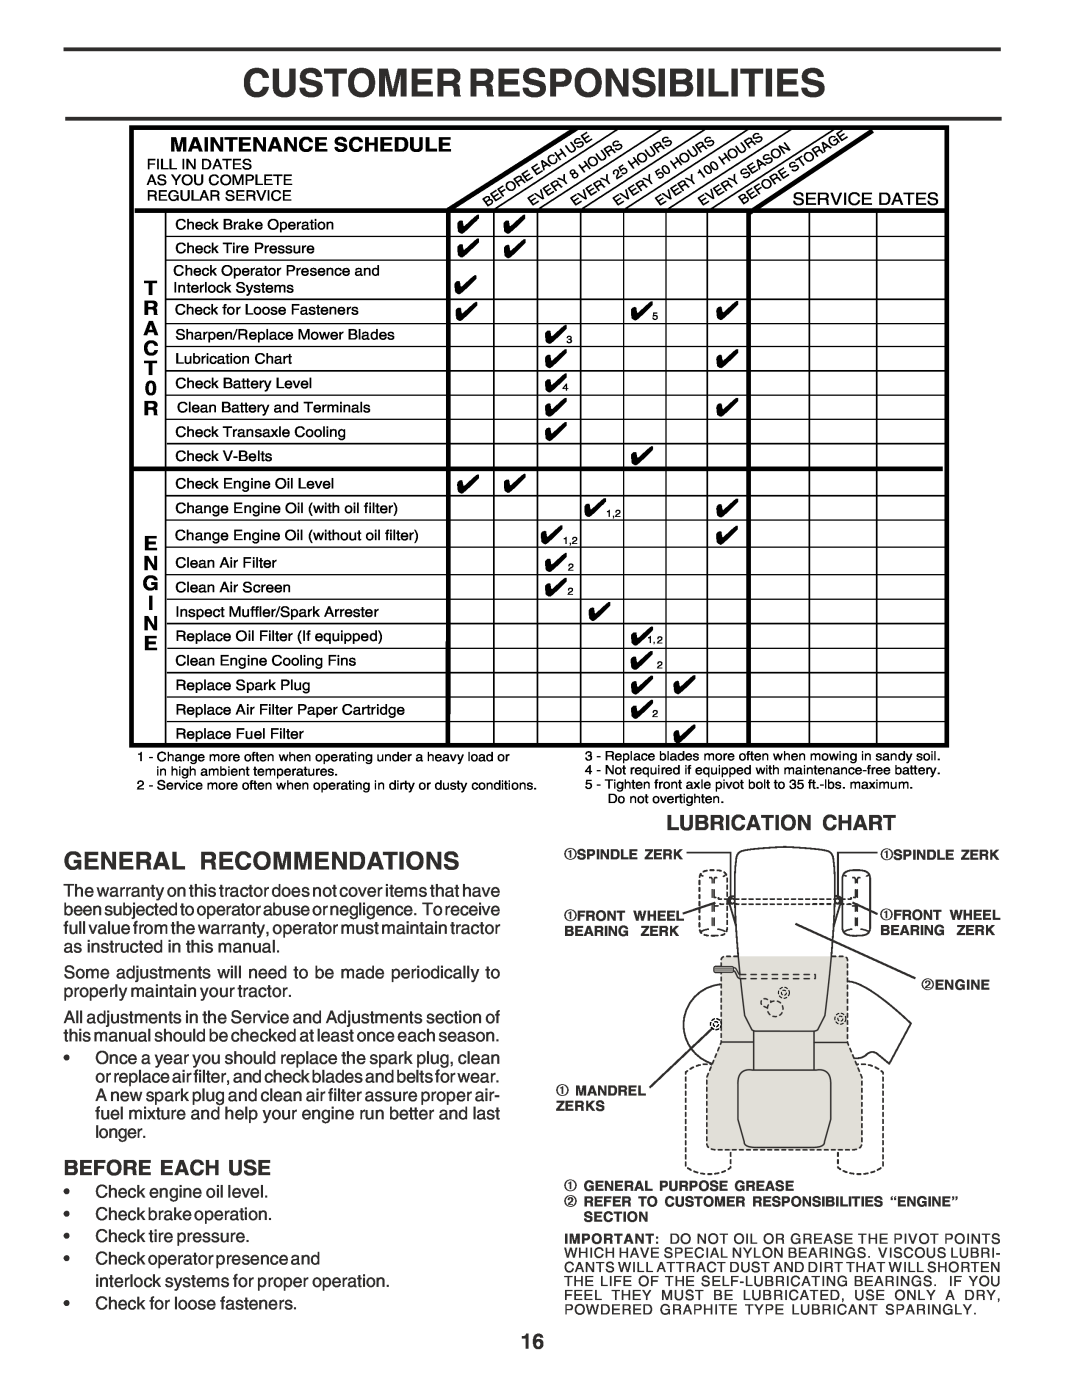 Poulan 180278 Customer Responsibilities, General Recommendations, Lubrication Chart, Before Each Use, Maintenance Schedule 